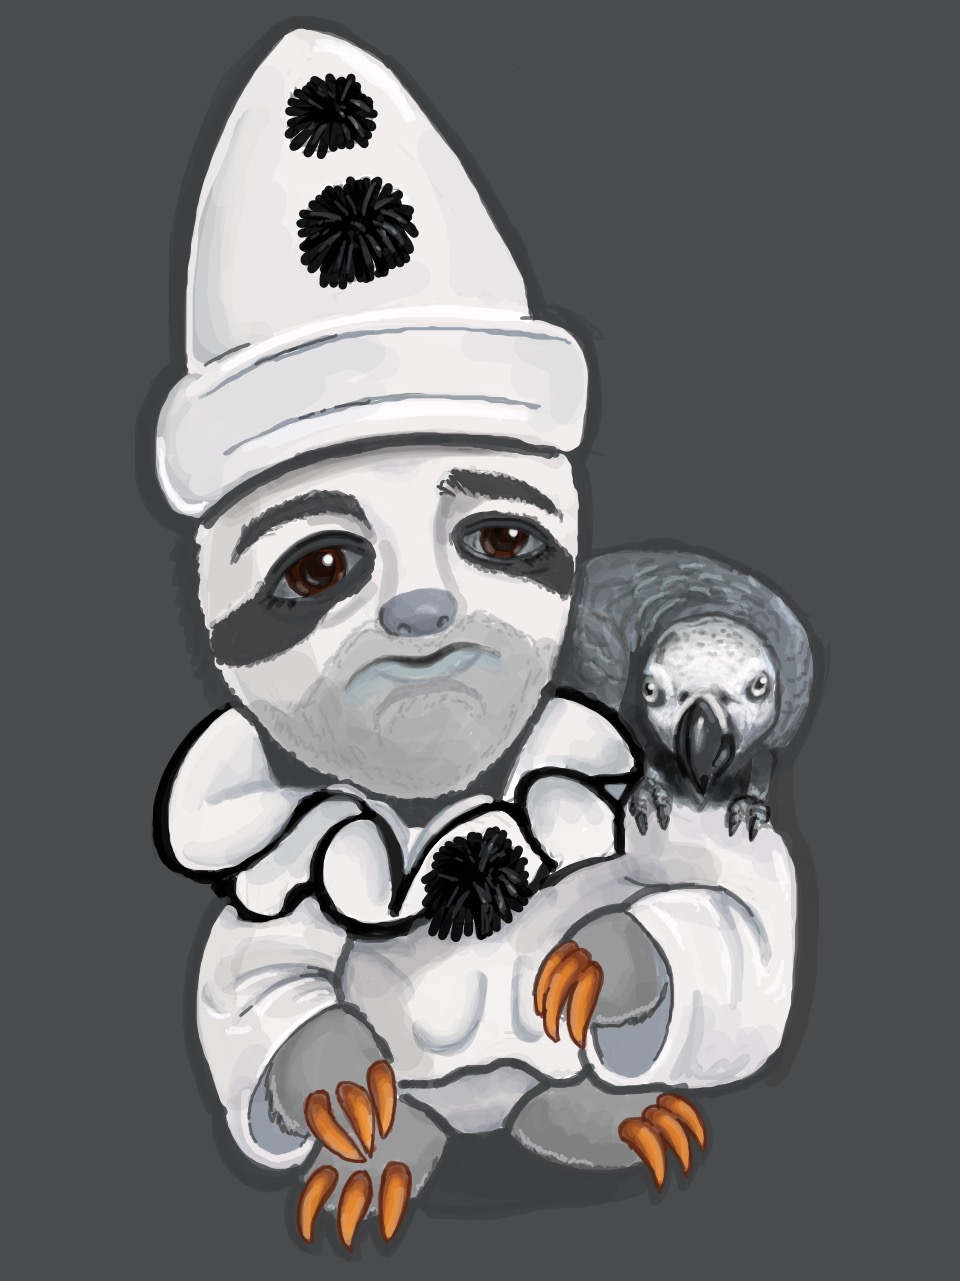 A sad sloth dressed up as a Pierrot clown, with an African grey parrot sitting on his shoulder.